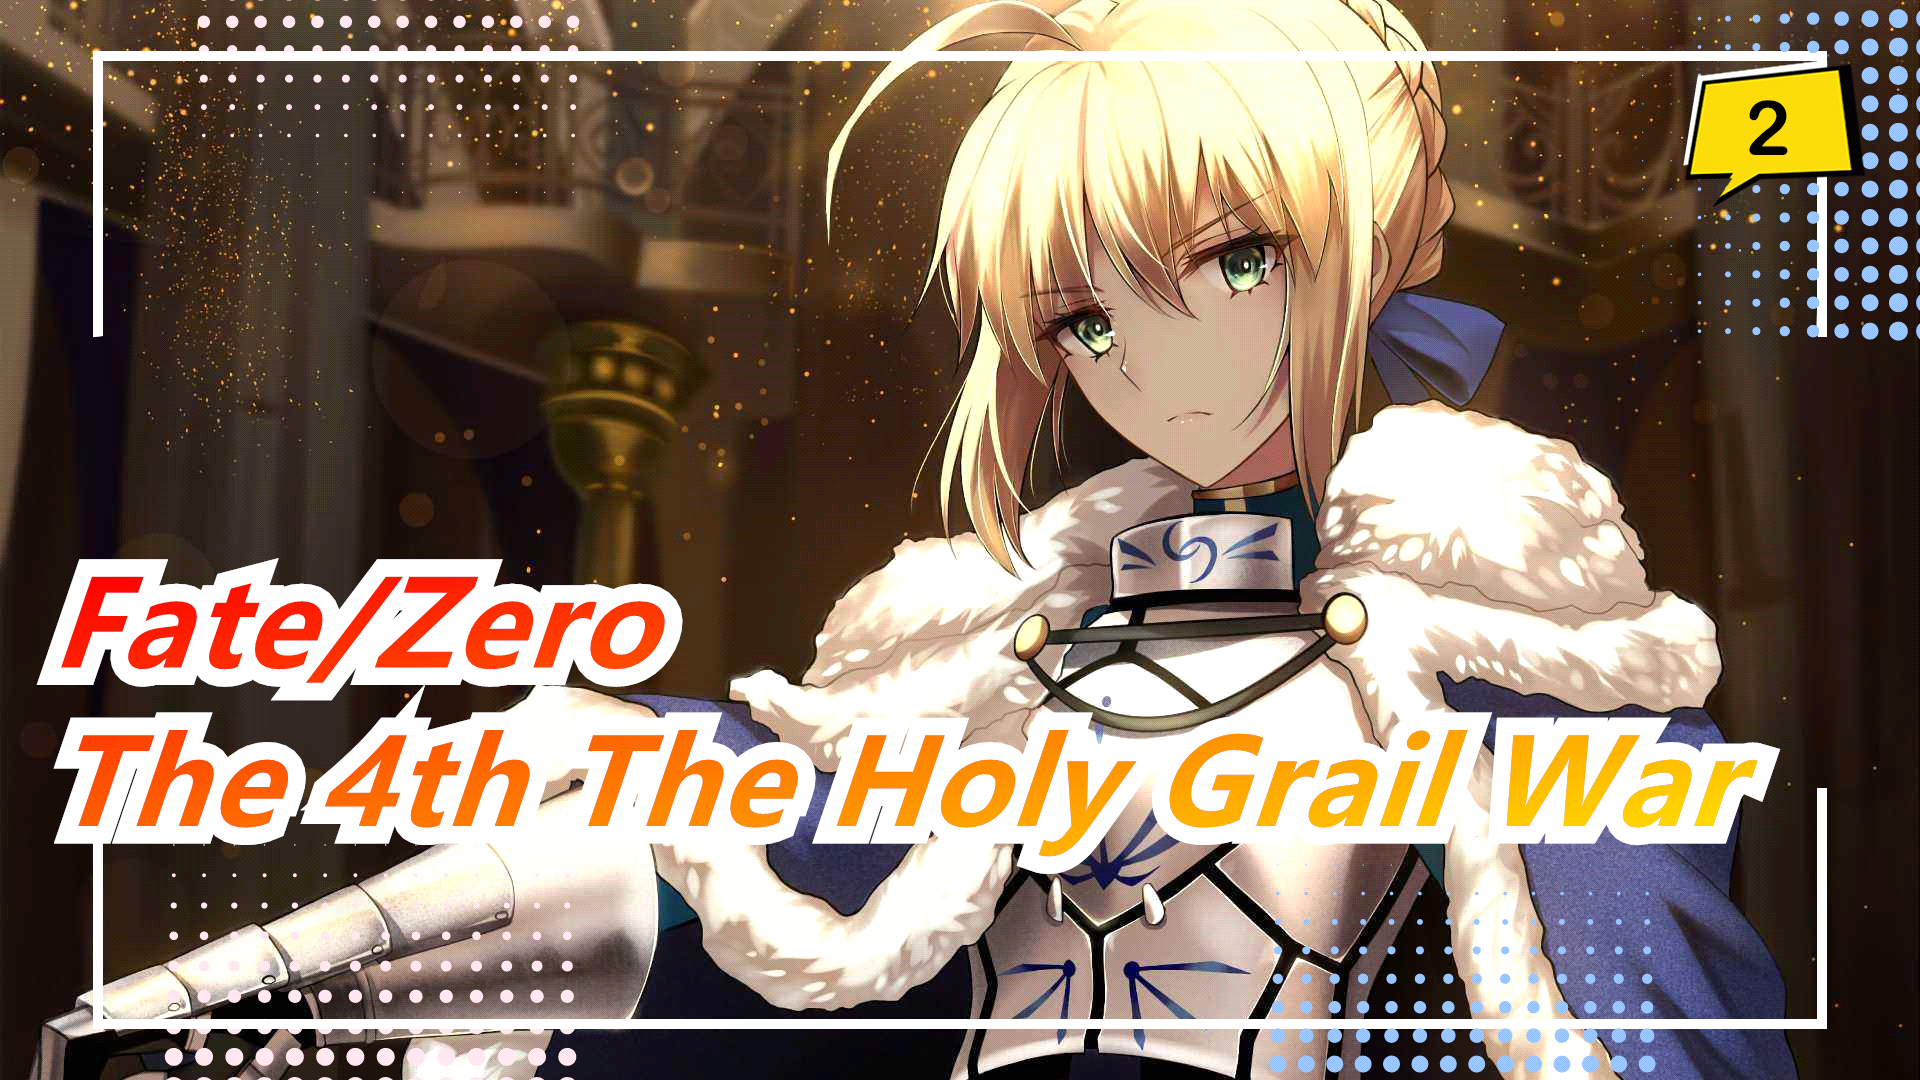 Saber holy grail war fate stay night unlimited excalibur servant anime  HD wallpaper  Peakpx